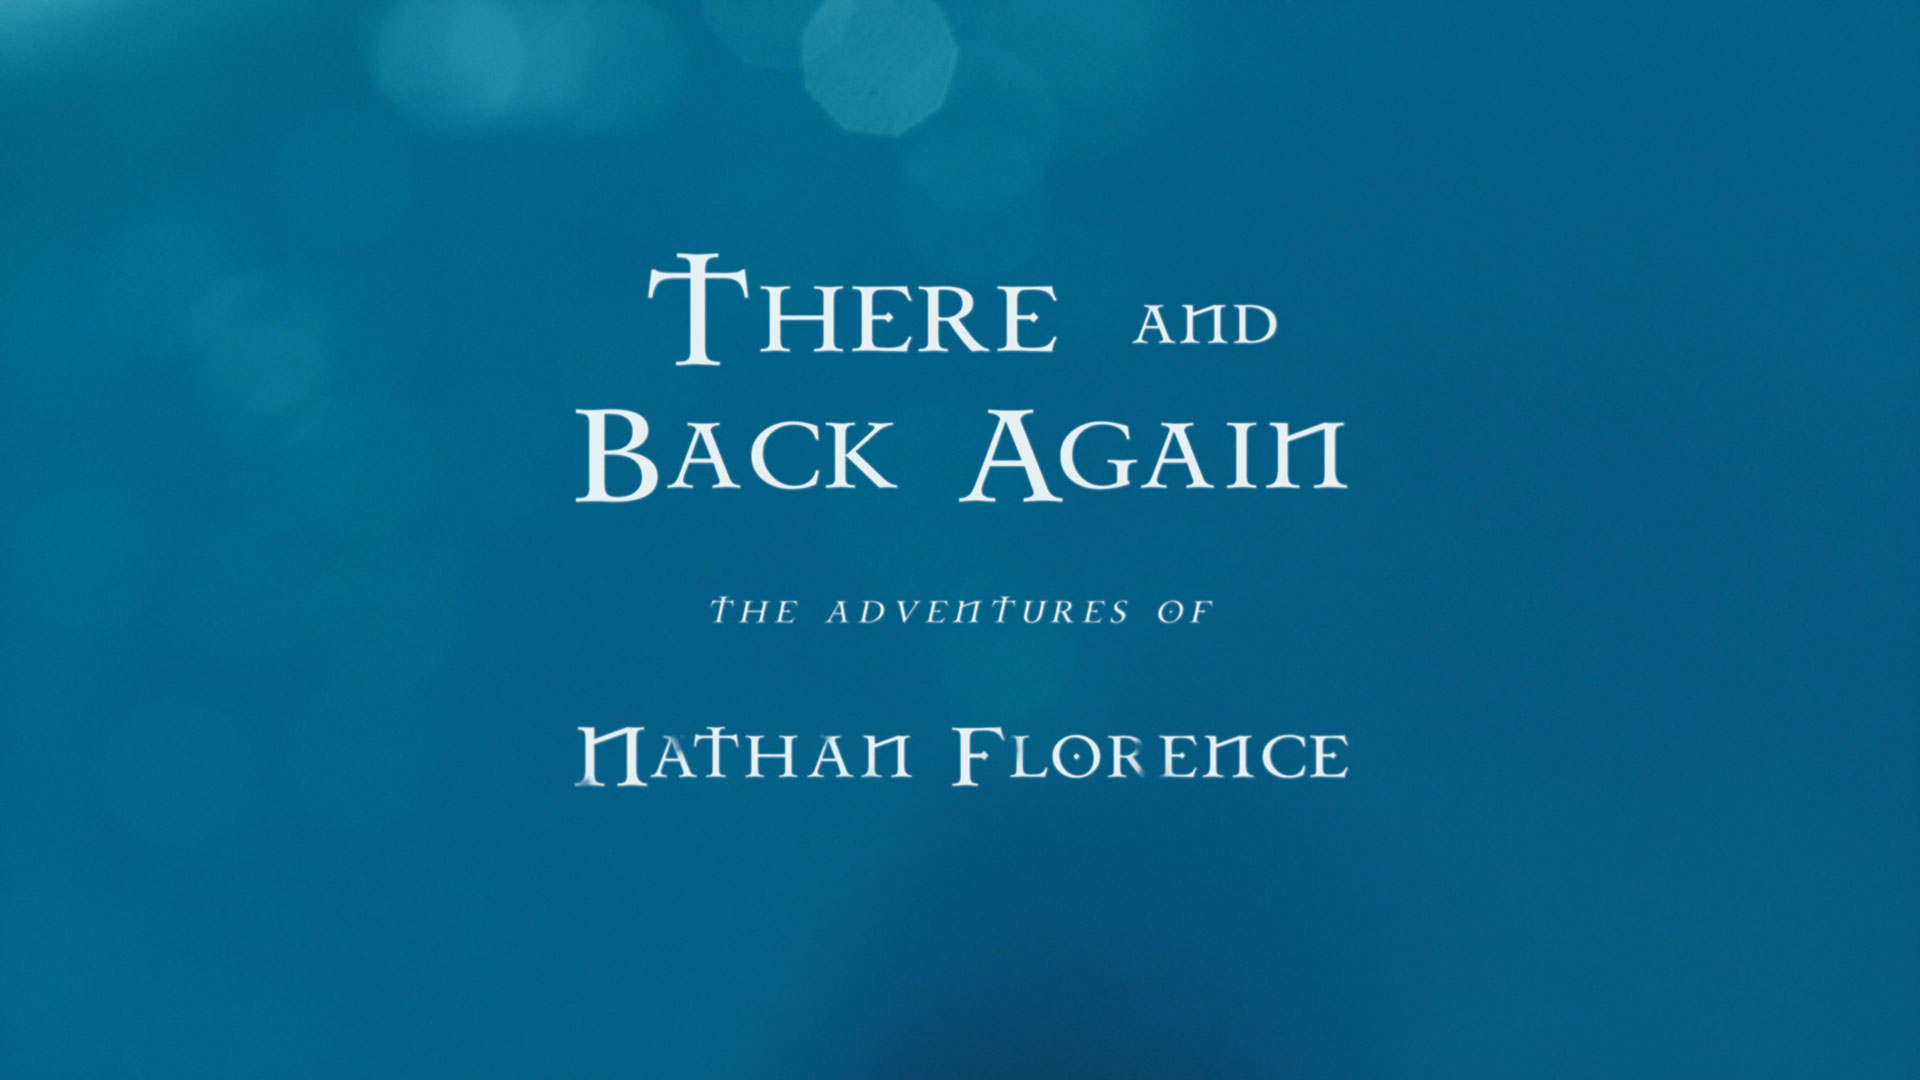 Nathan Florence — “There and Back Again”